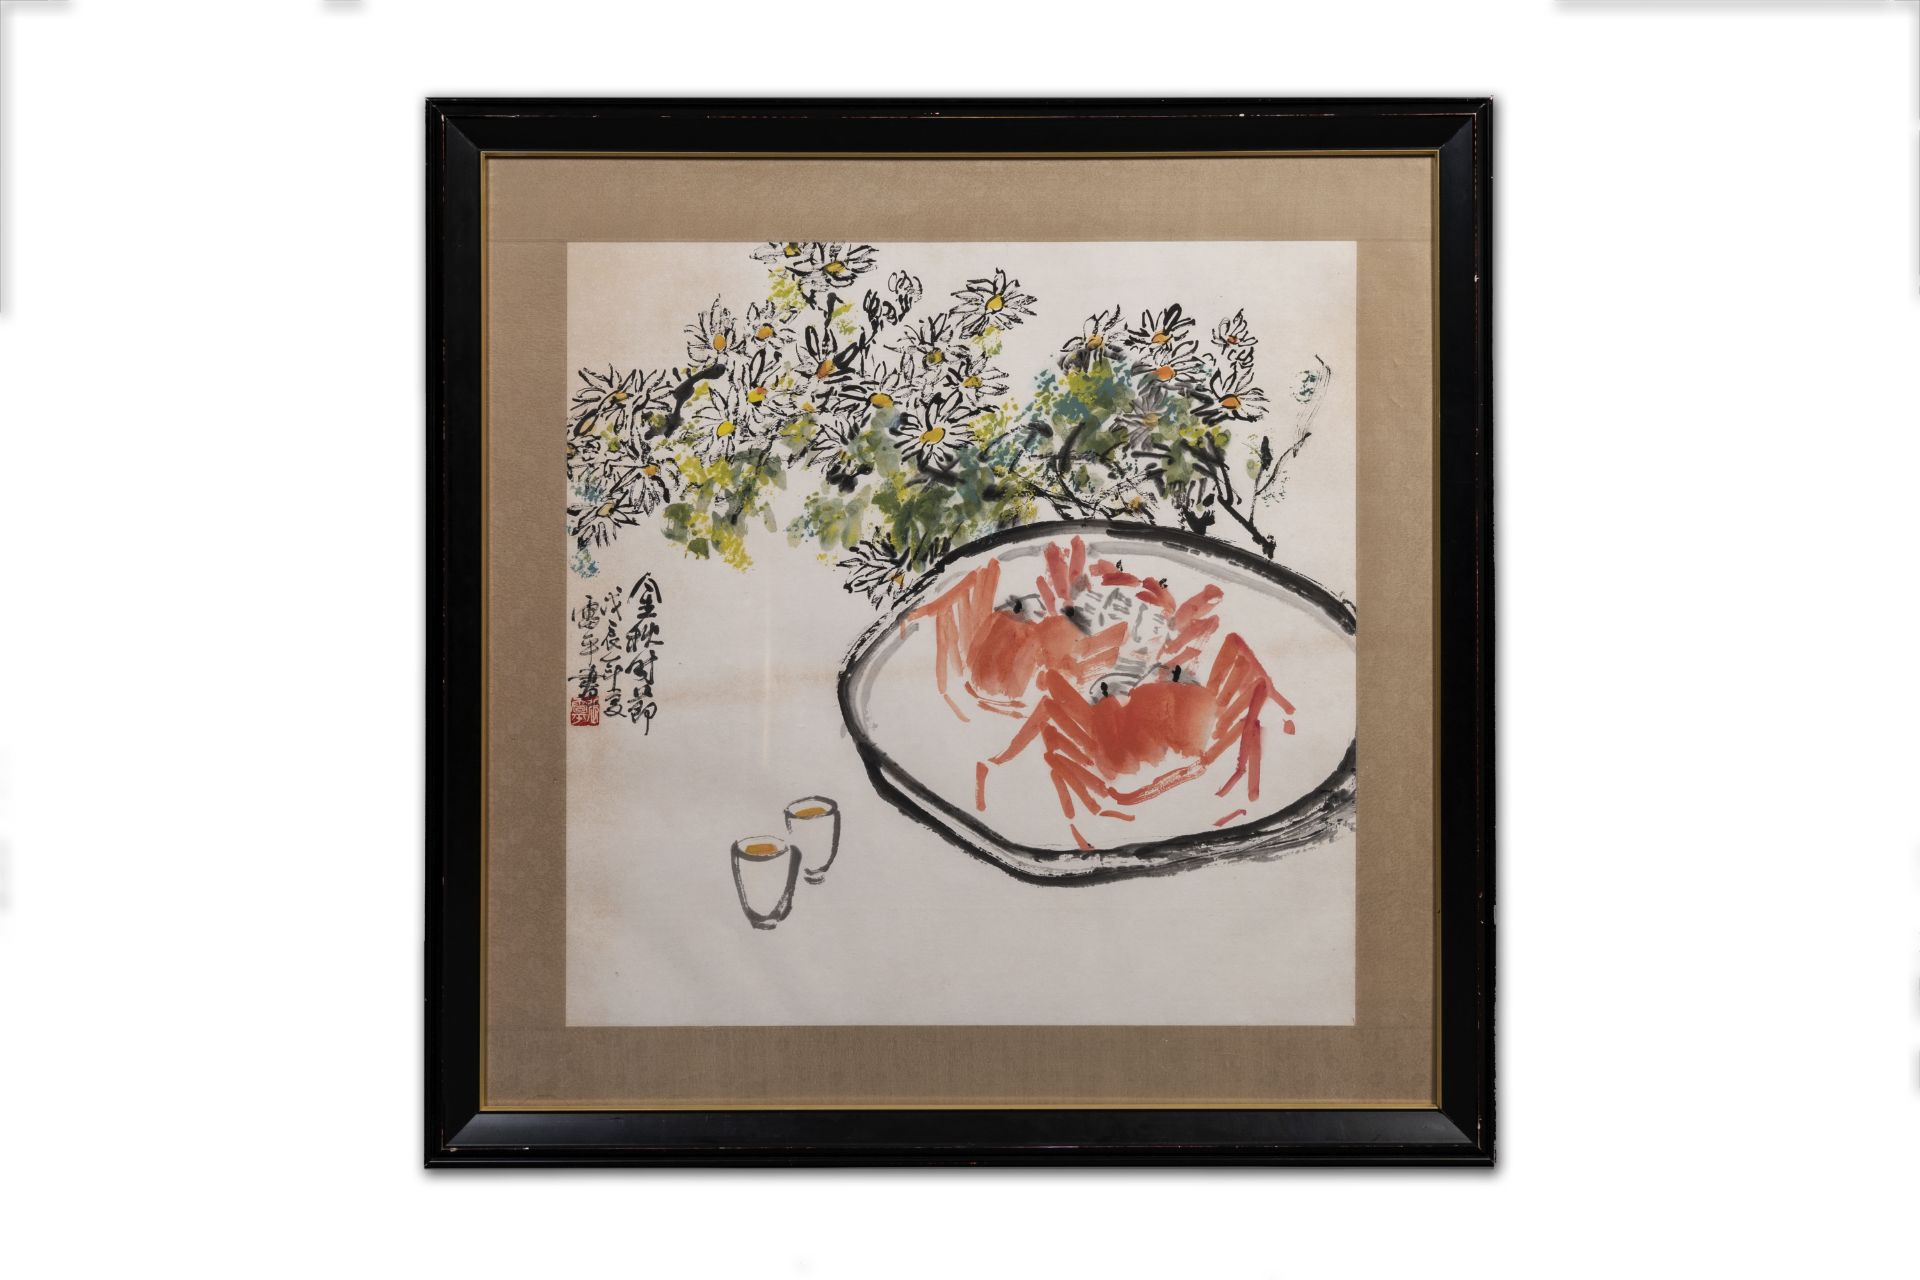 Zhang Leiping å¼µé›·å¹³ (1945): three various works, ink and color on paper, dated 1988 - Image 6 of 12